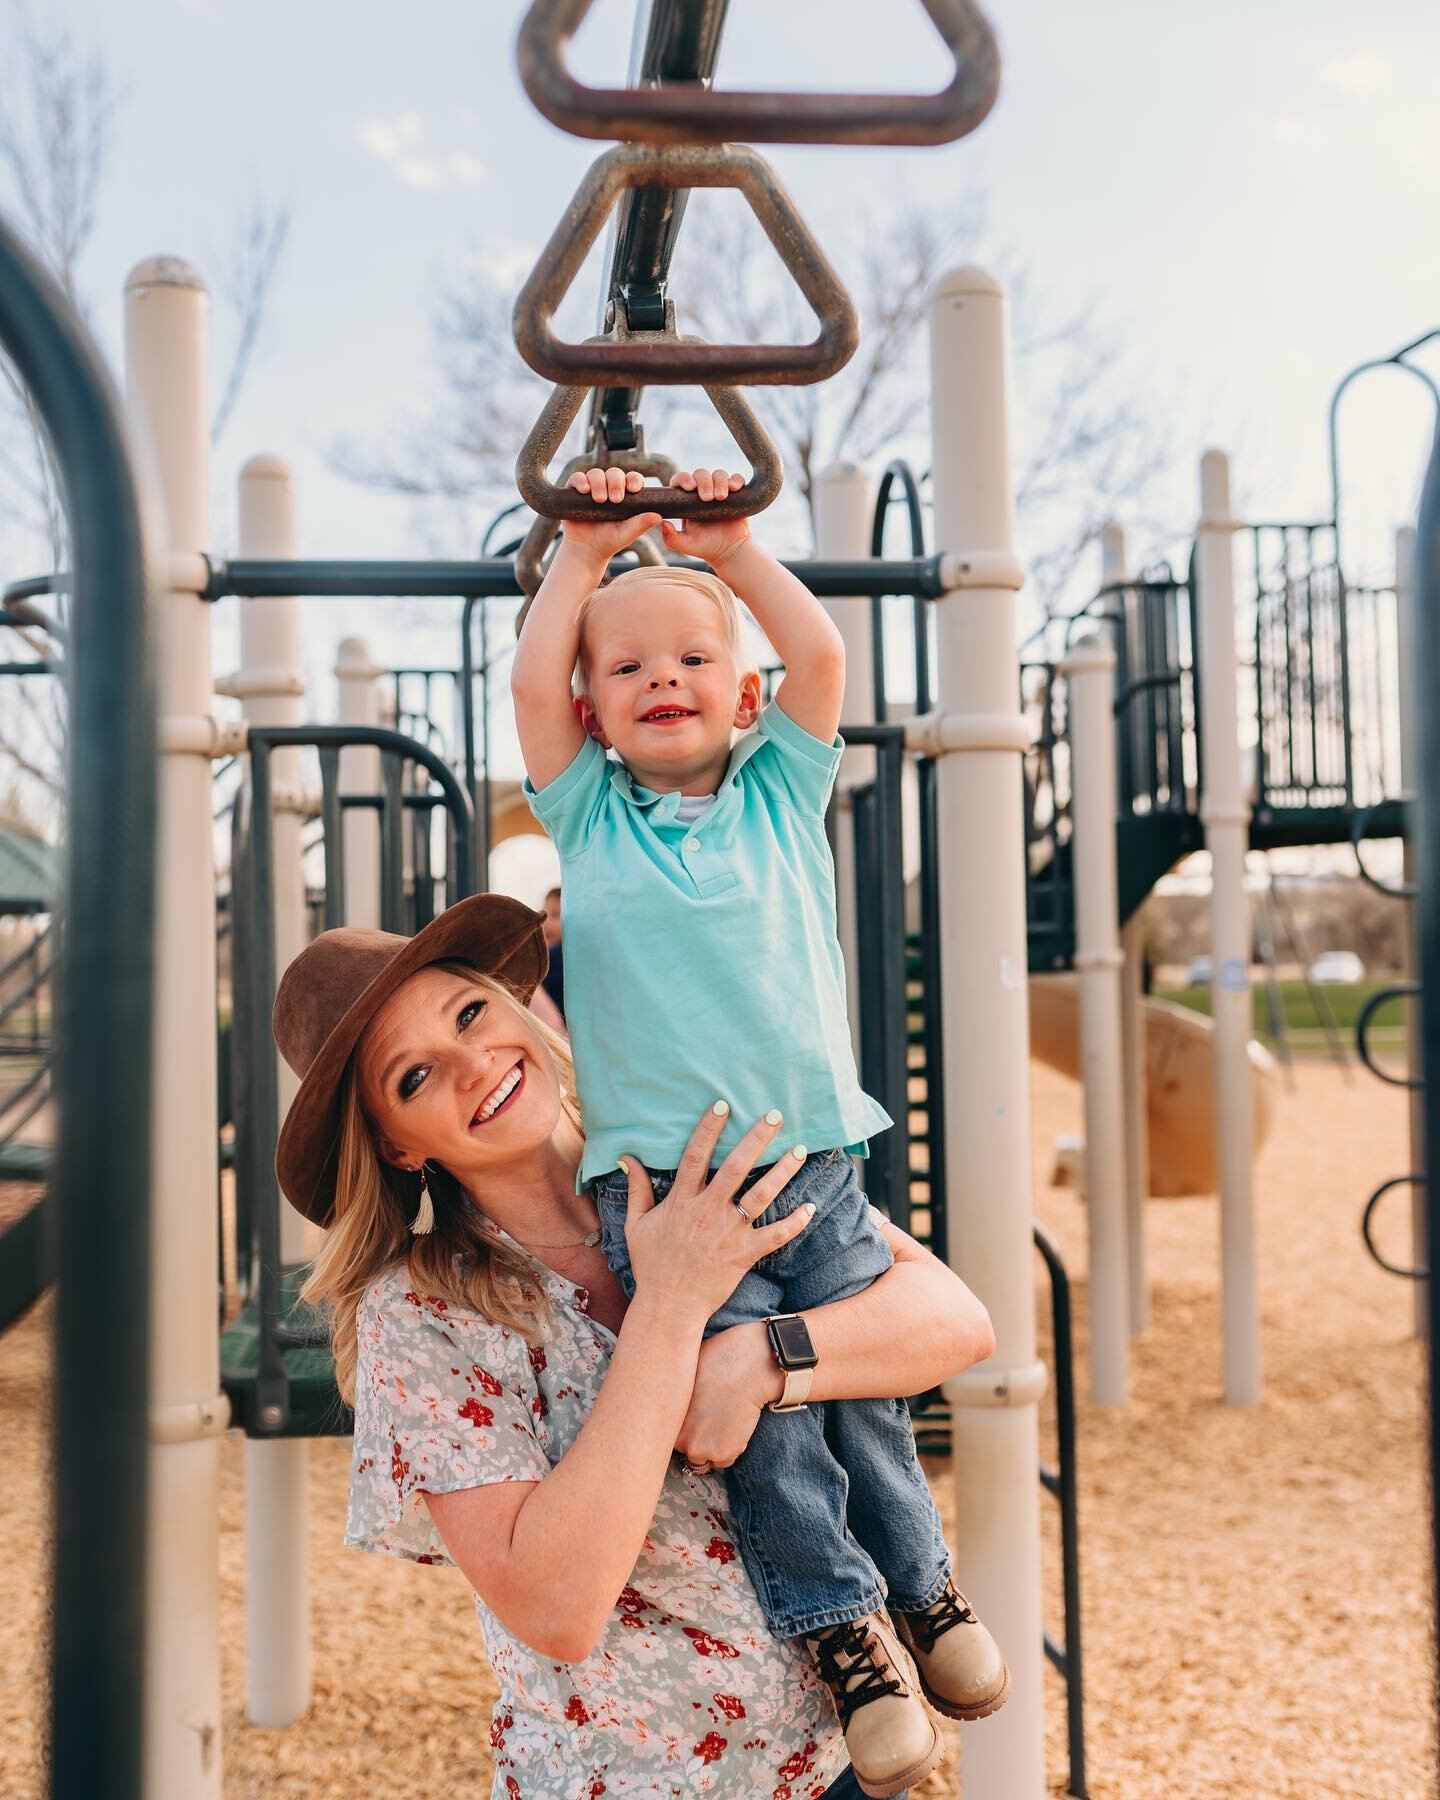 My most recent mini session giveaway went to @katiemgrose and her fam! She had such a great idea to do a documentary style shoot at a nearby park and I am so glad we did! It was stress-free AND fun! What are your thoughts? Documentary style vs posed?